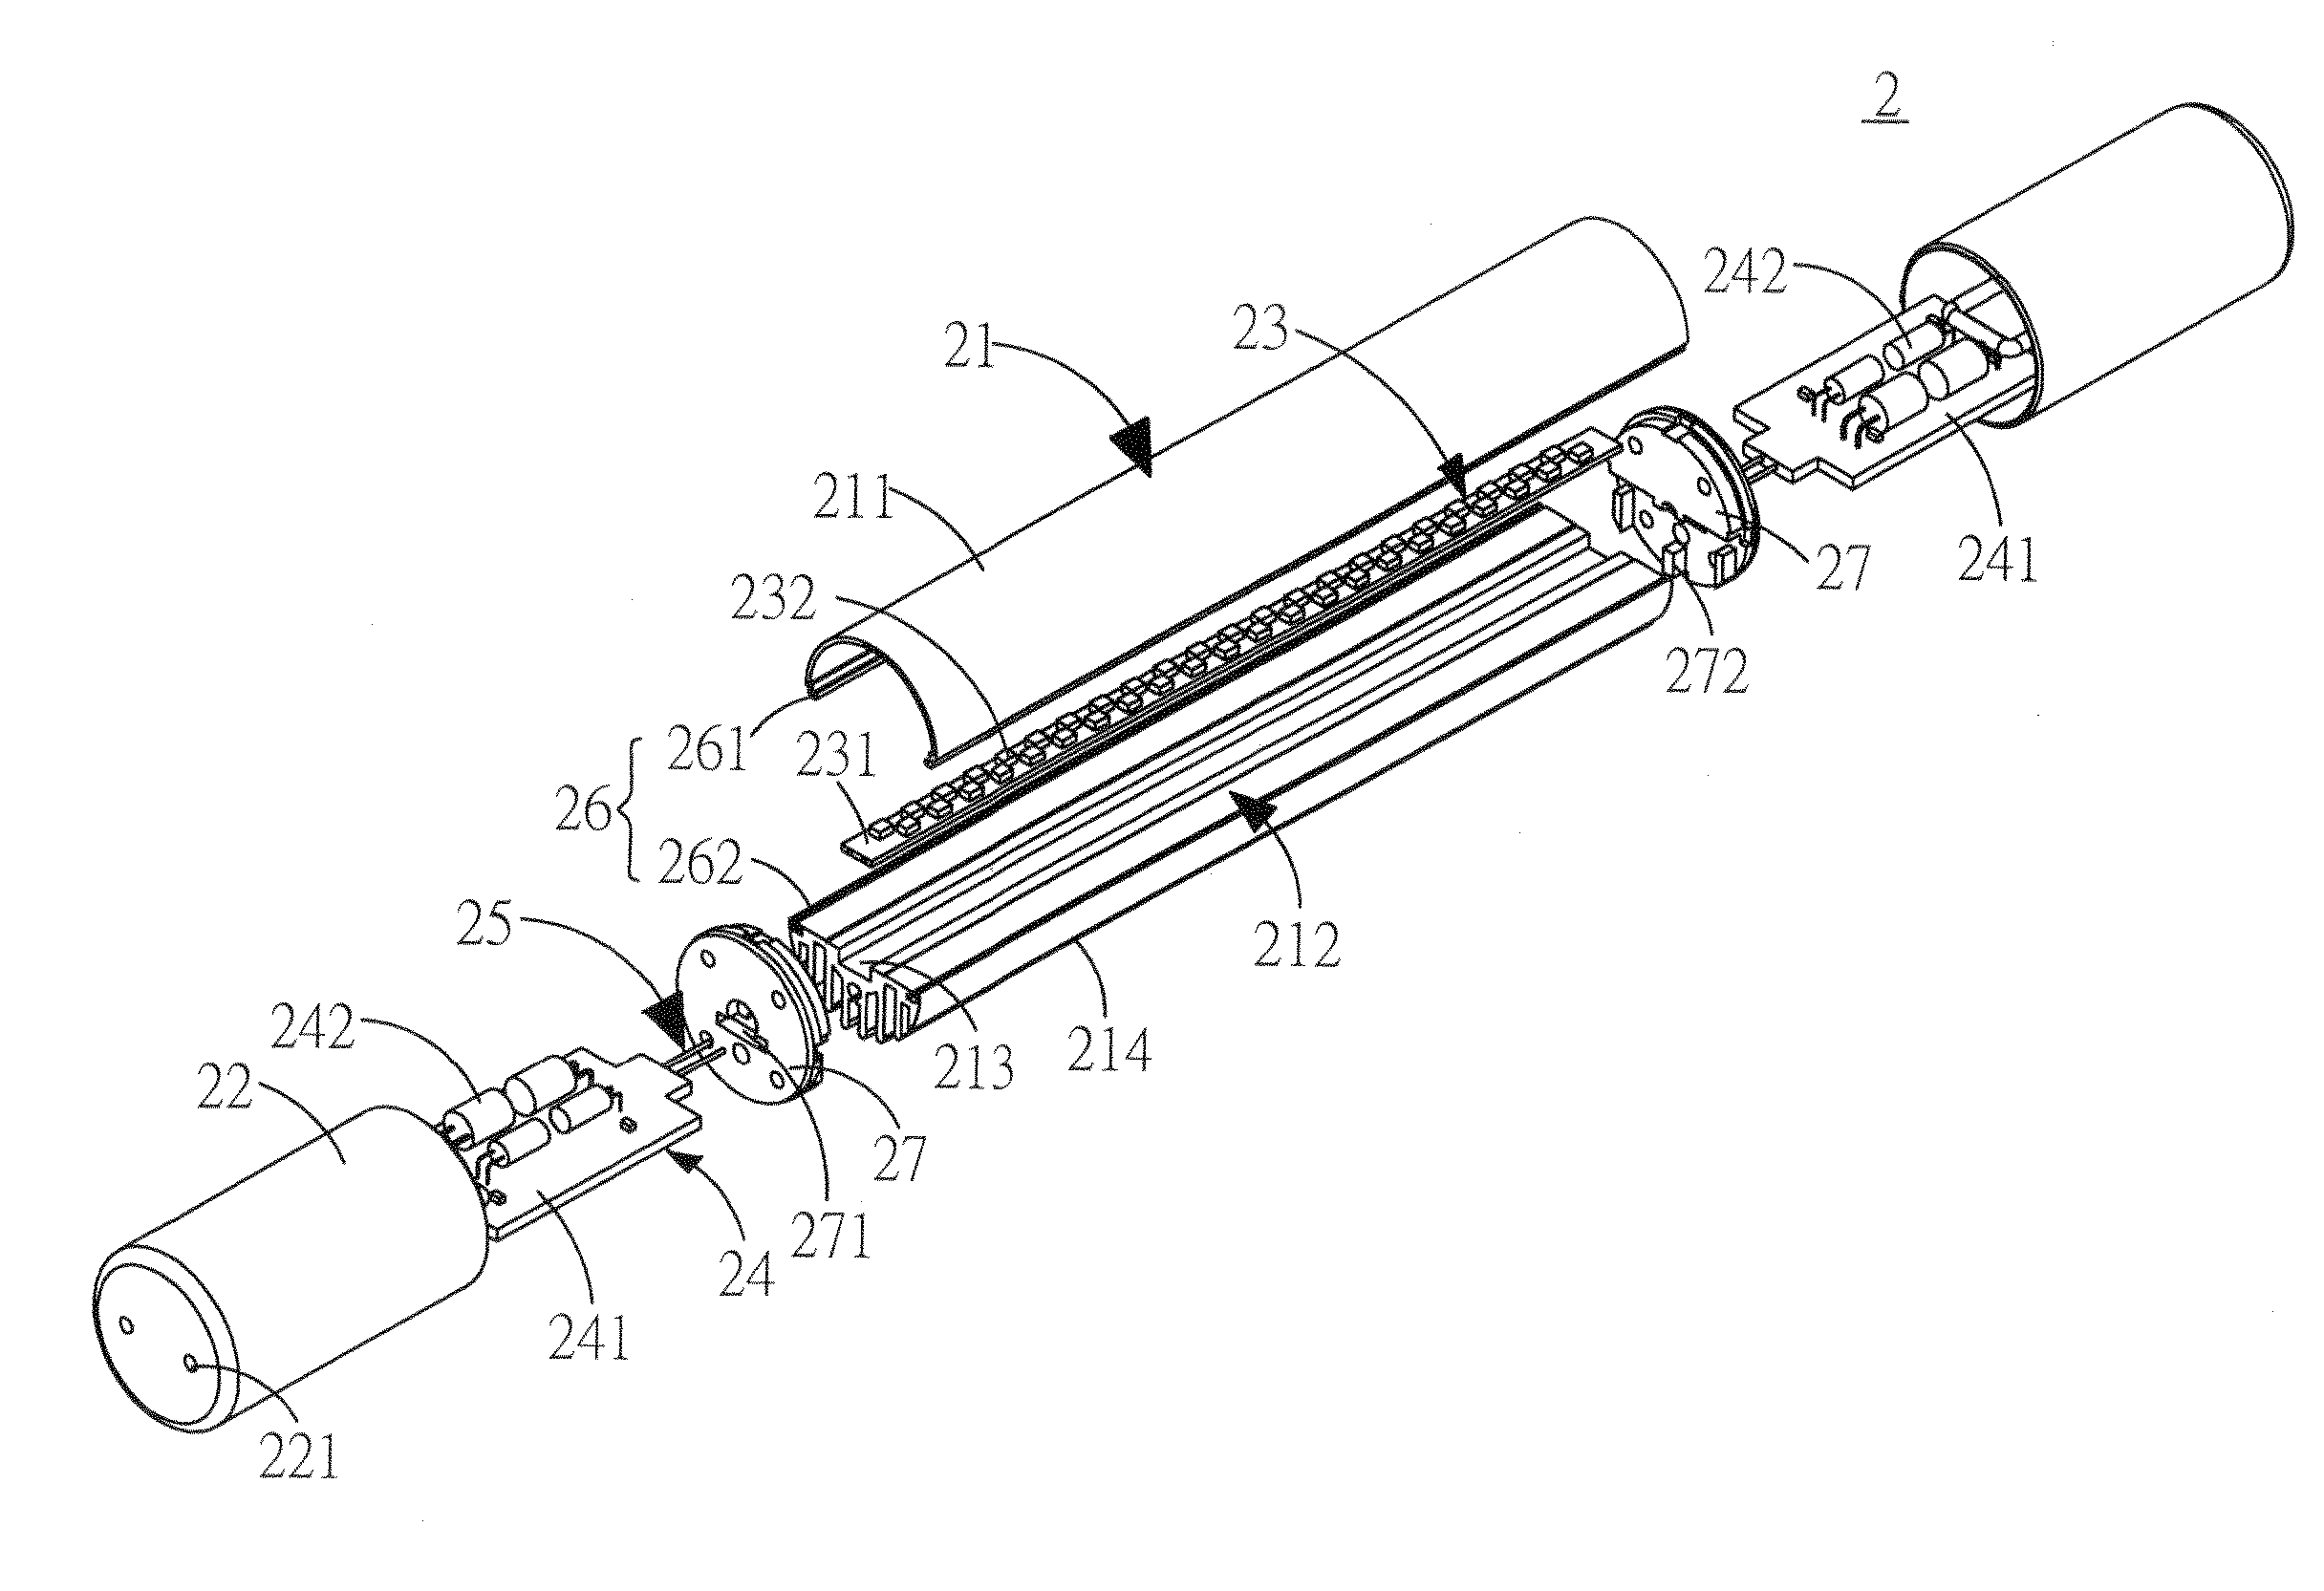 Separate LED lamp tube and light source module formed therefrom